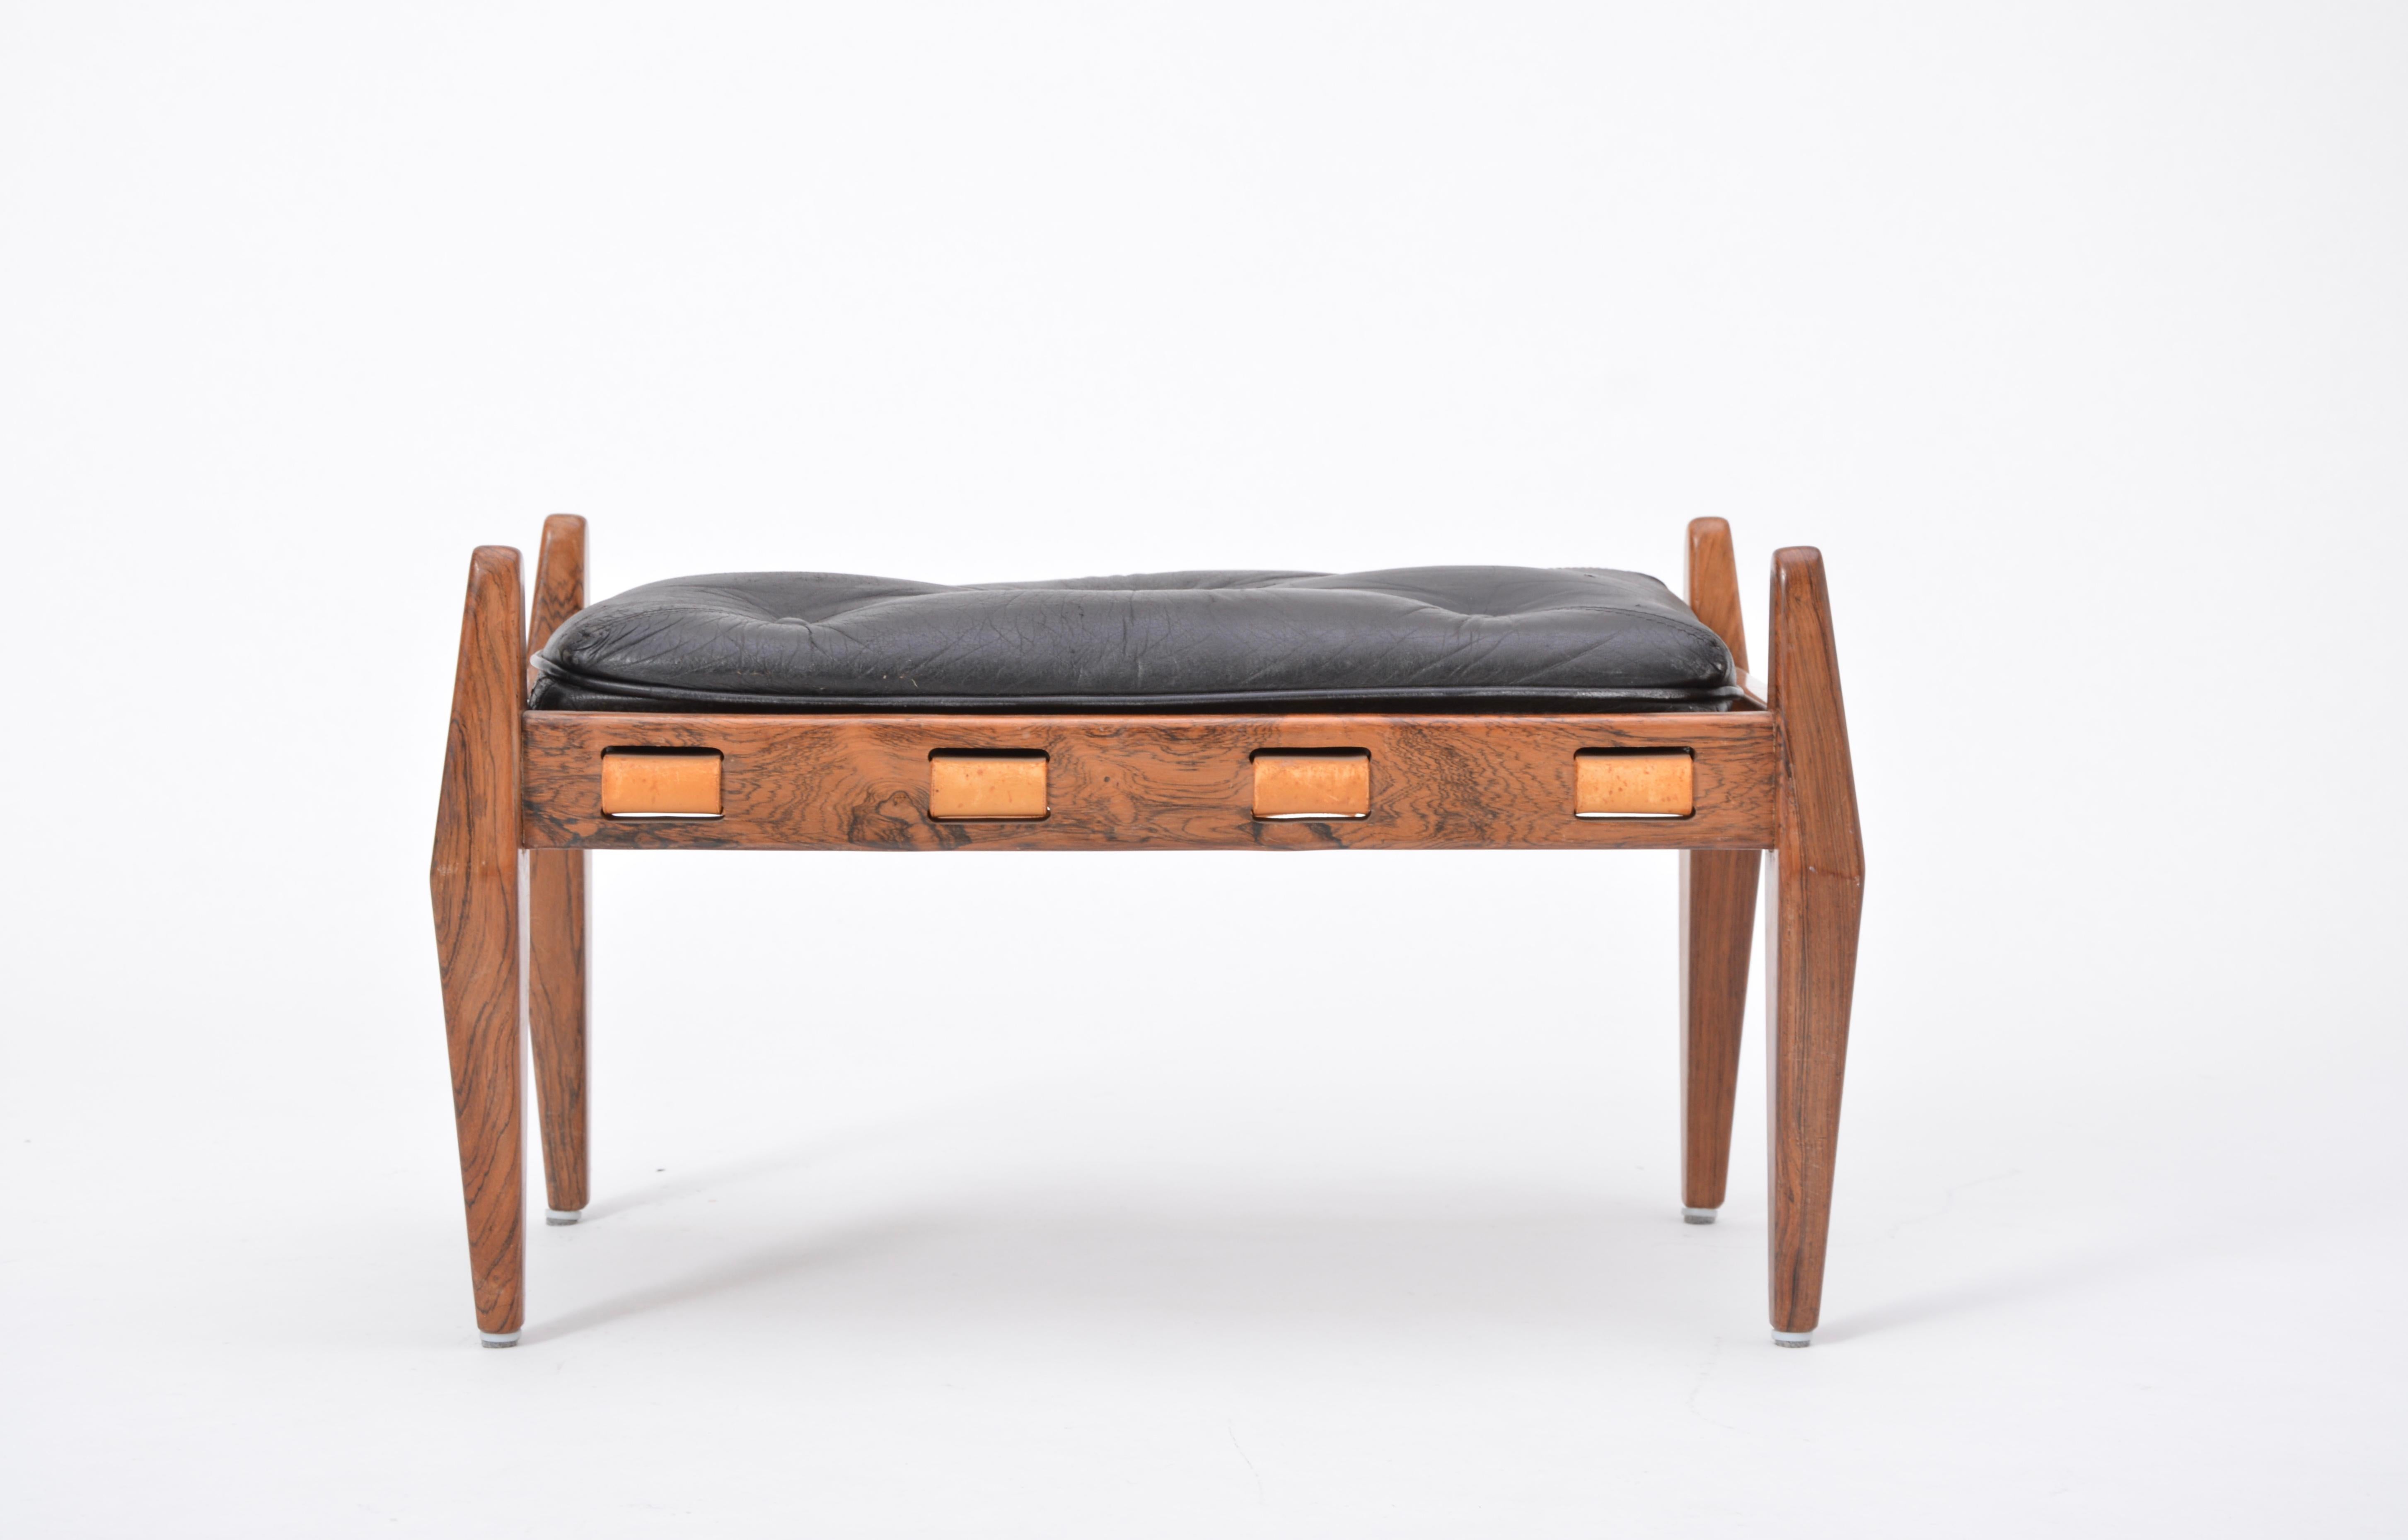 Black Mid-Century  Leather ottoman or foot stool, Attributed to Sergio Rodrigues

This ottoman or foot stool was designed and produced in the 1960s in Brazil. It is attributed to Sergio Rodrigues. The structure is made of beautiful dark wood. Four